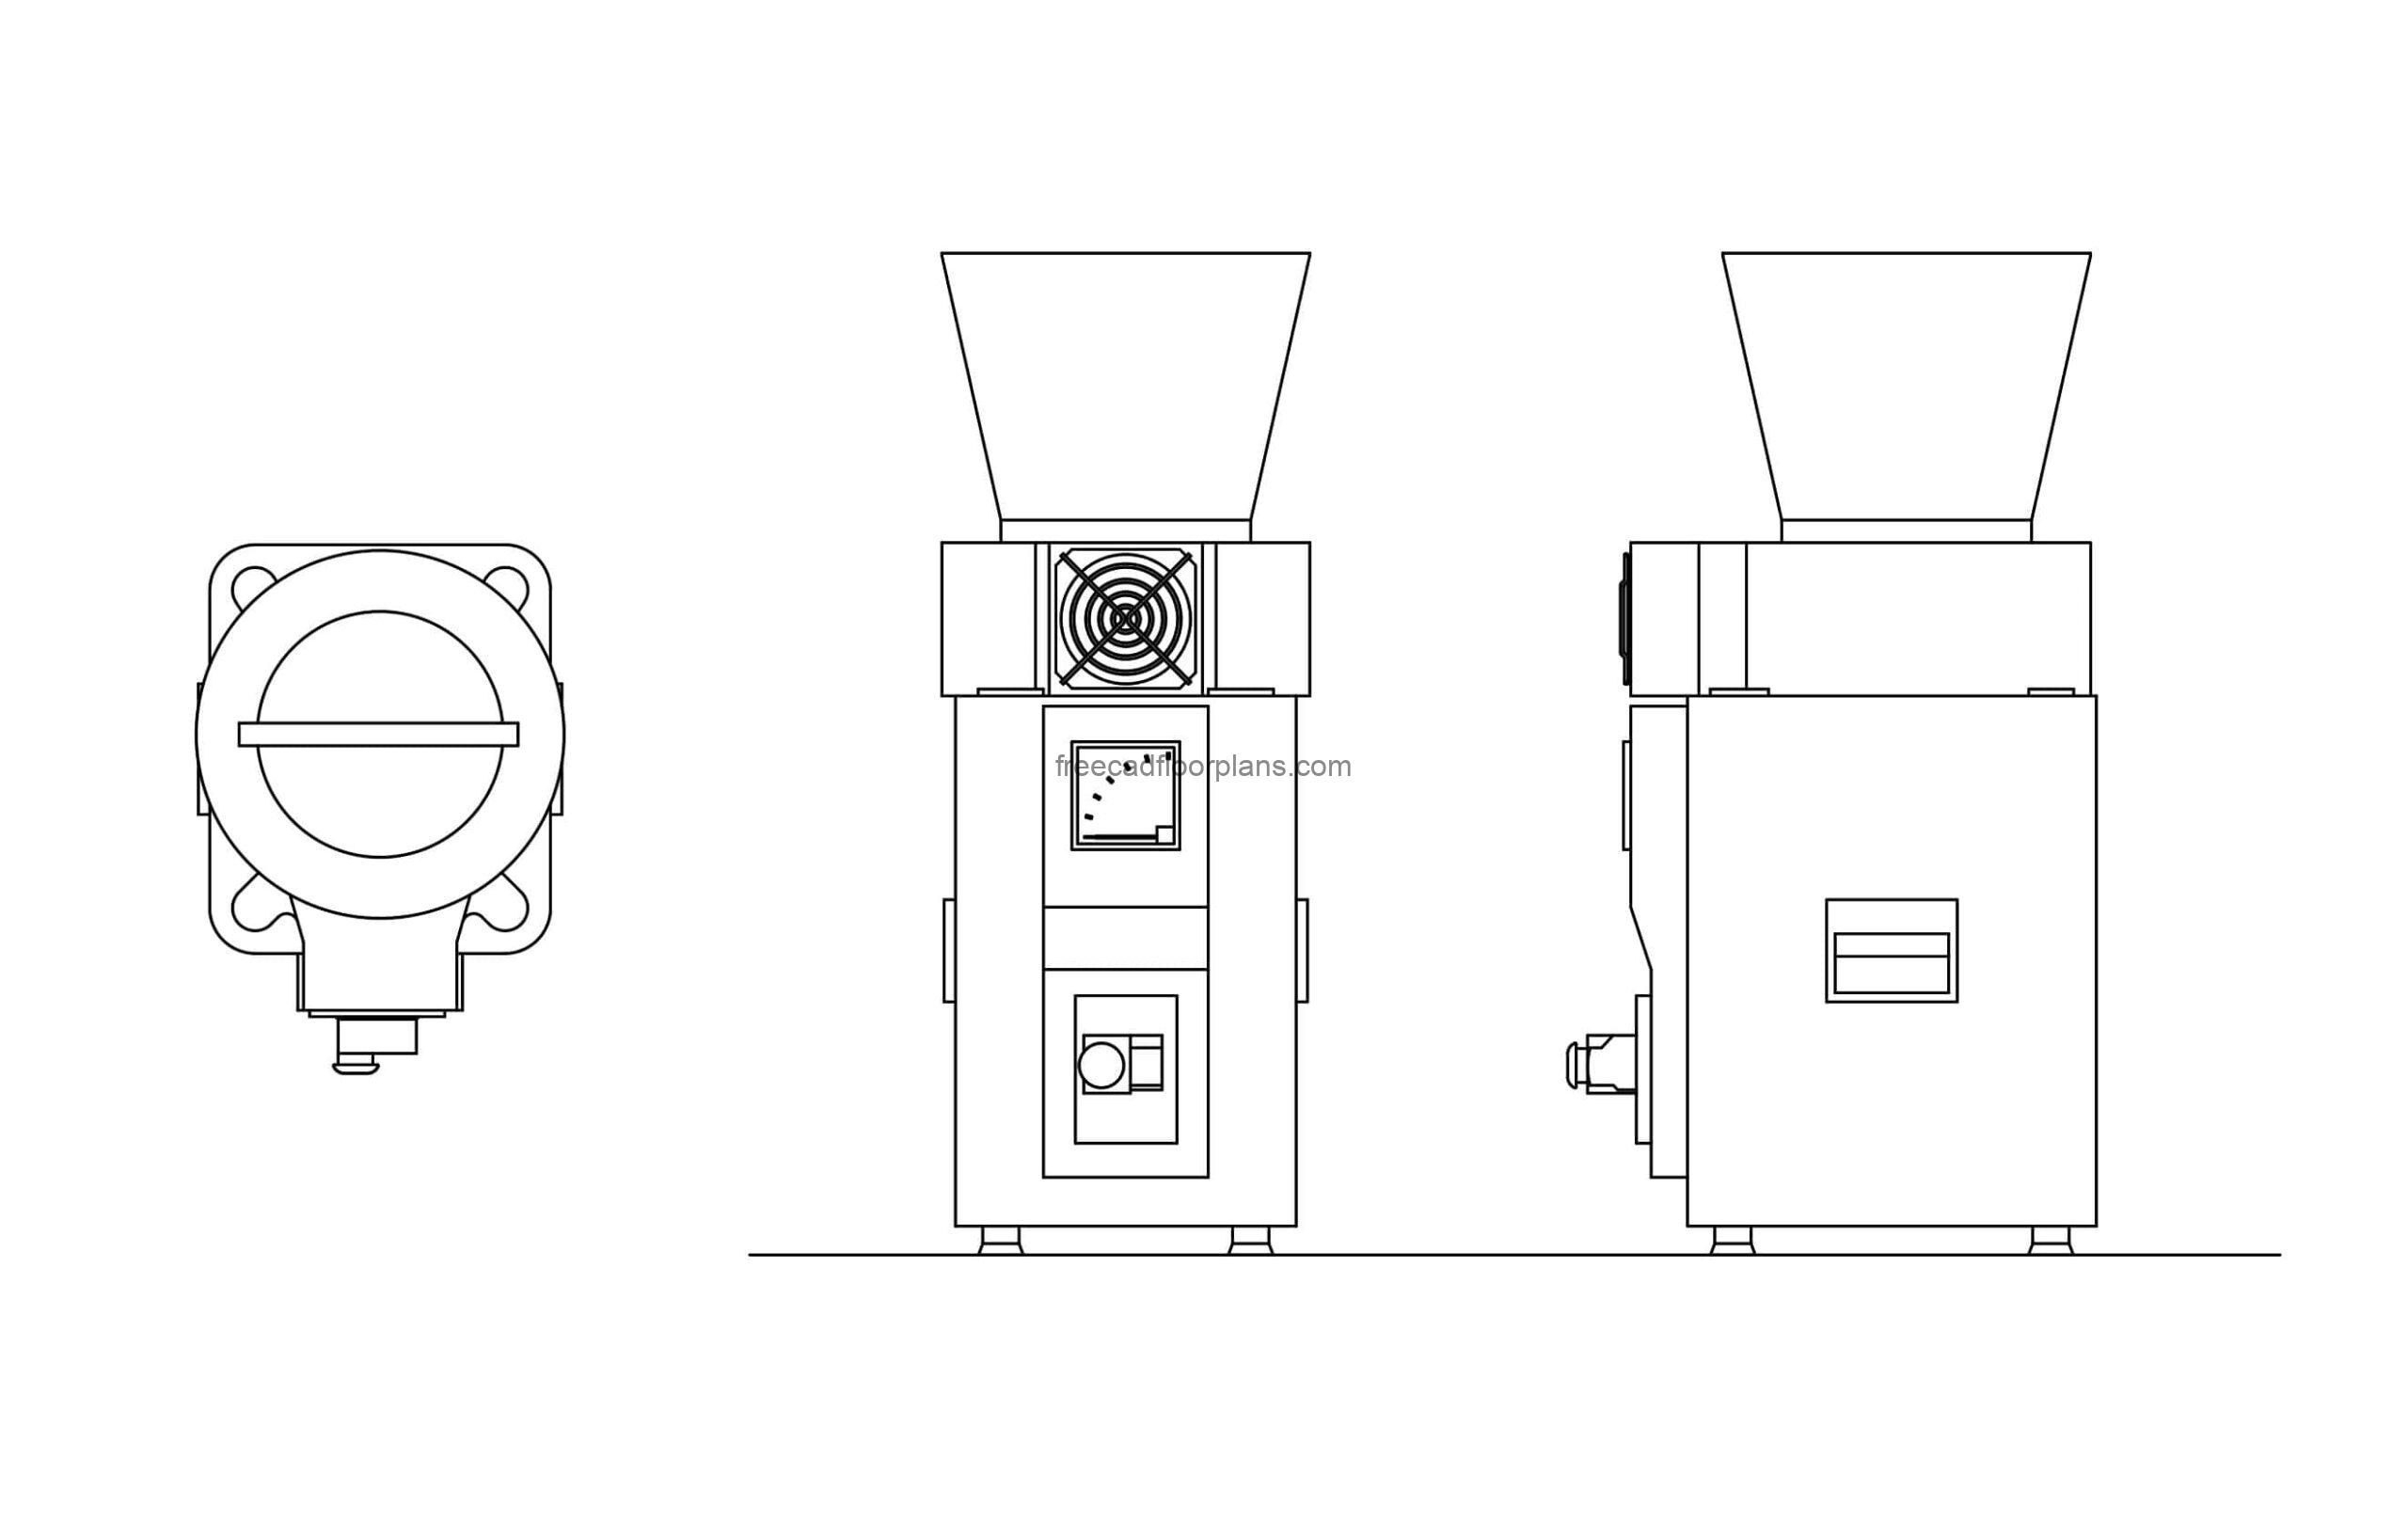 flour mill machine cad block drawings, 2d views plan and elevations dwg file for free download